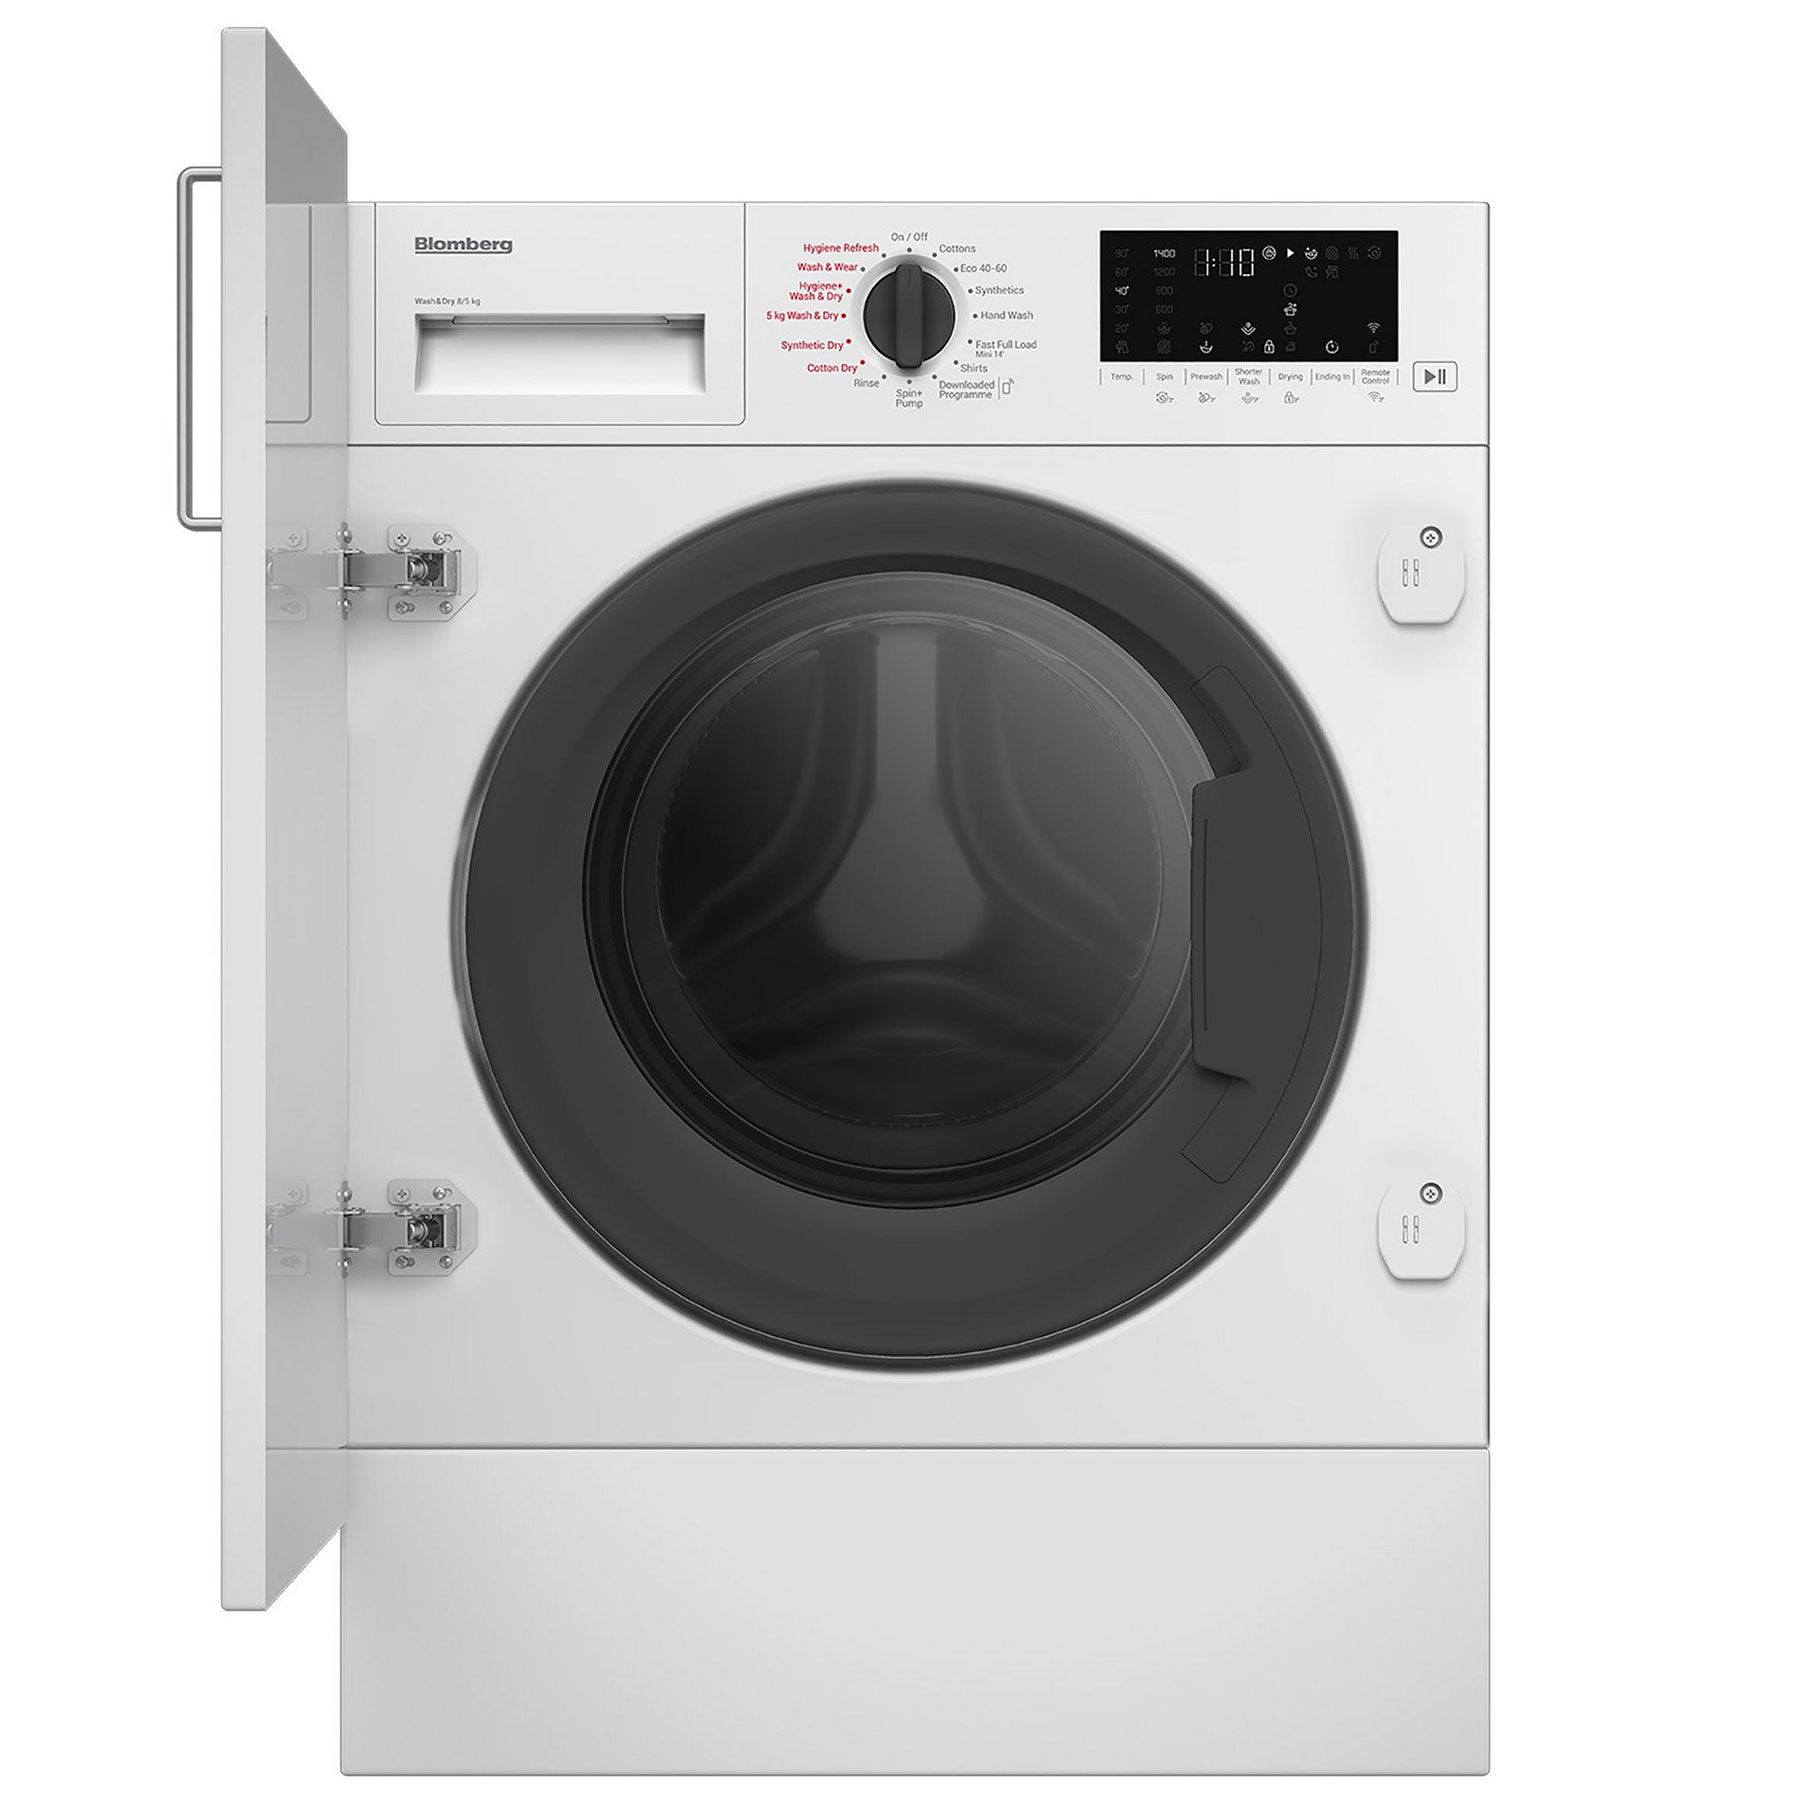 Image of Blomberg LRI1854110 Integrated Washer Dryer 1400rpm 8kg 5kg D Rated